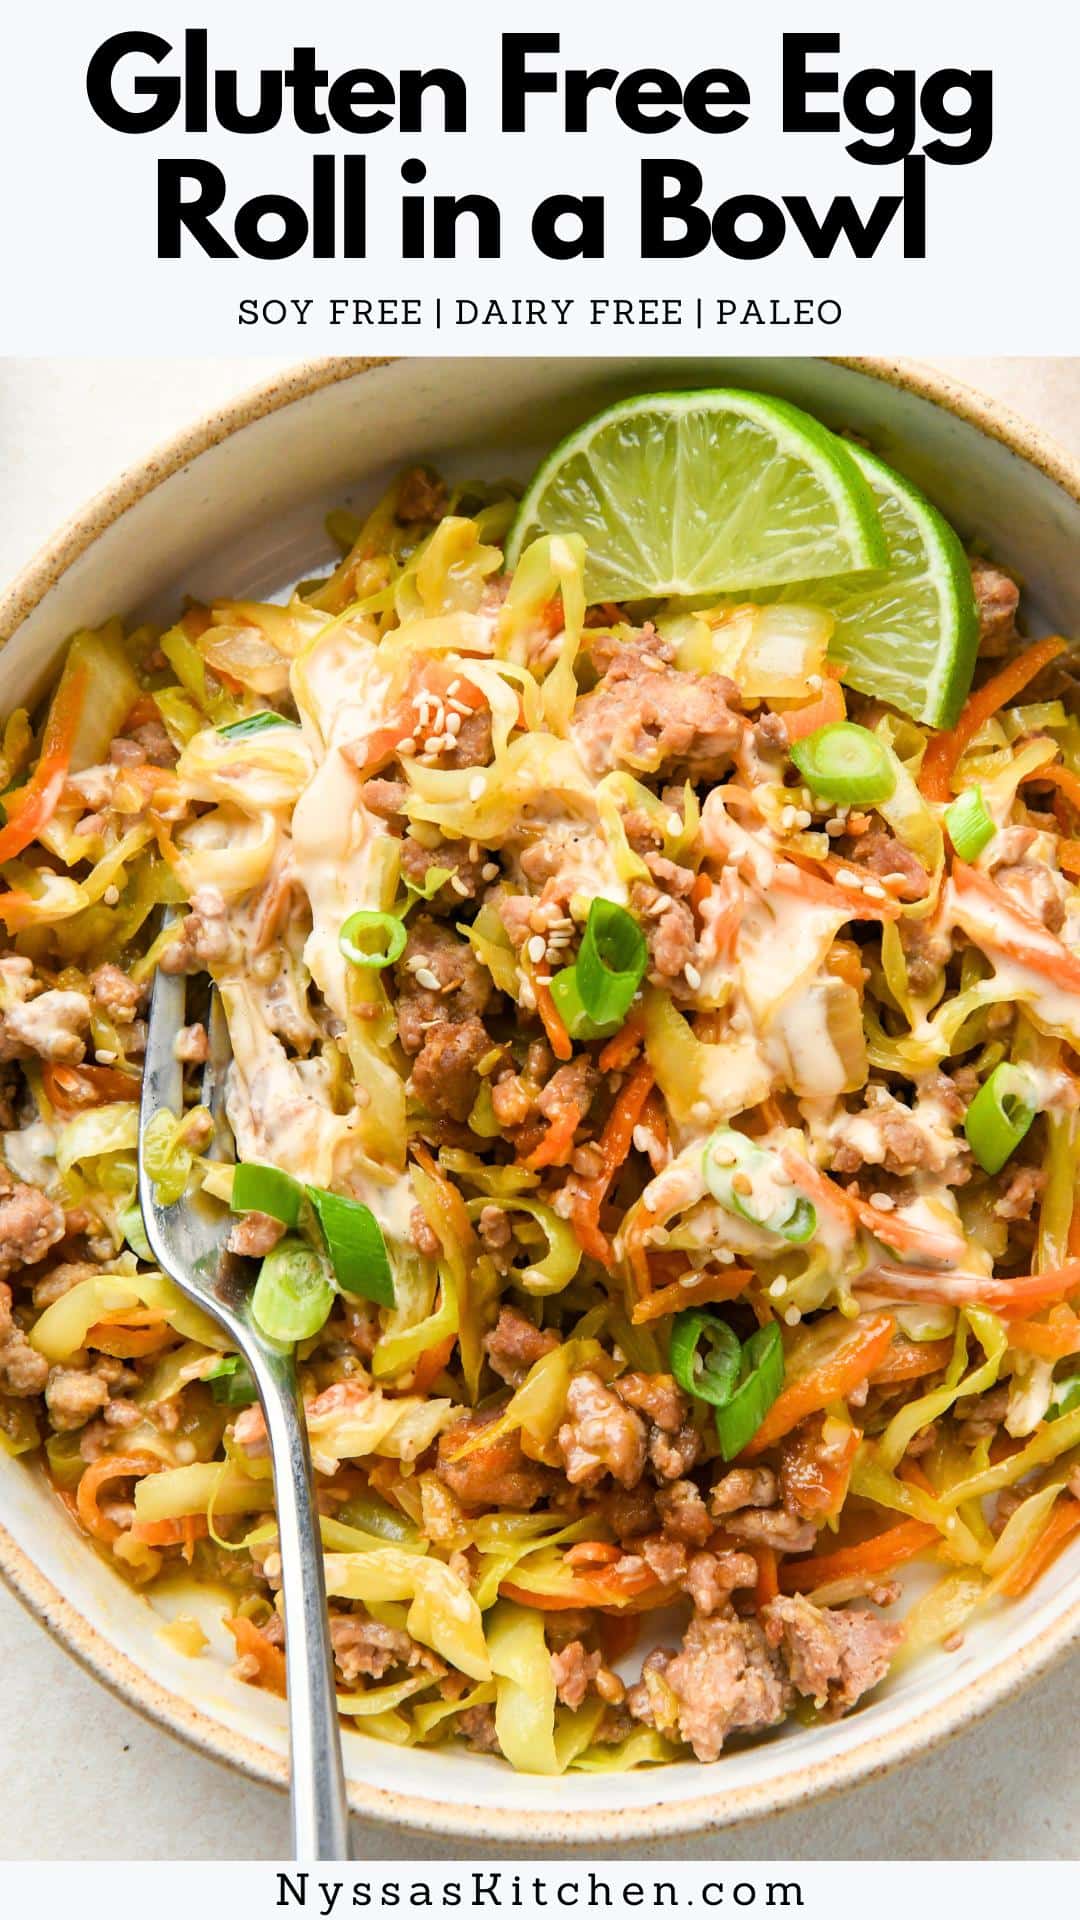 This gluten free egg roll in a bowl comes together in around 30 minutes in one skillet for the perfect weeknight dinner recipe! Made with ground turkey, shredded cabbage, carrots, a savory soy free sauce, and some irresistible garnishes. Easy to throw together and totally delicious! Whole30, gluten free, paleo.